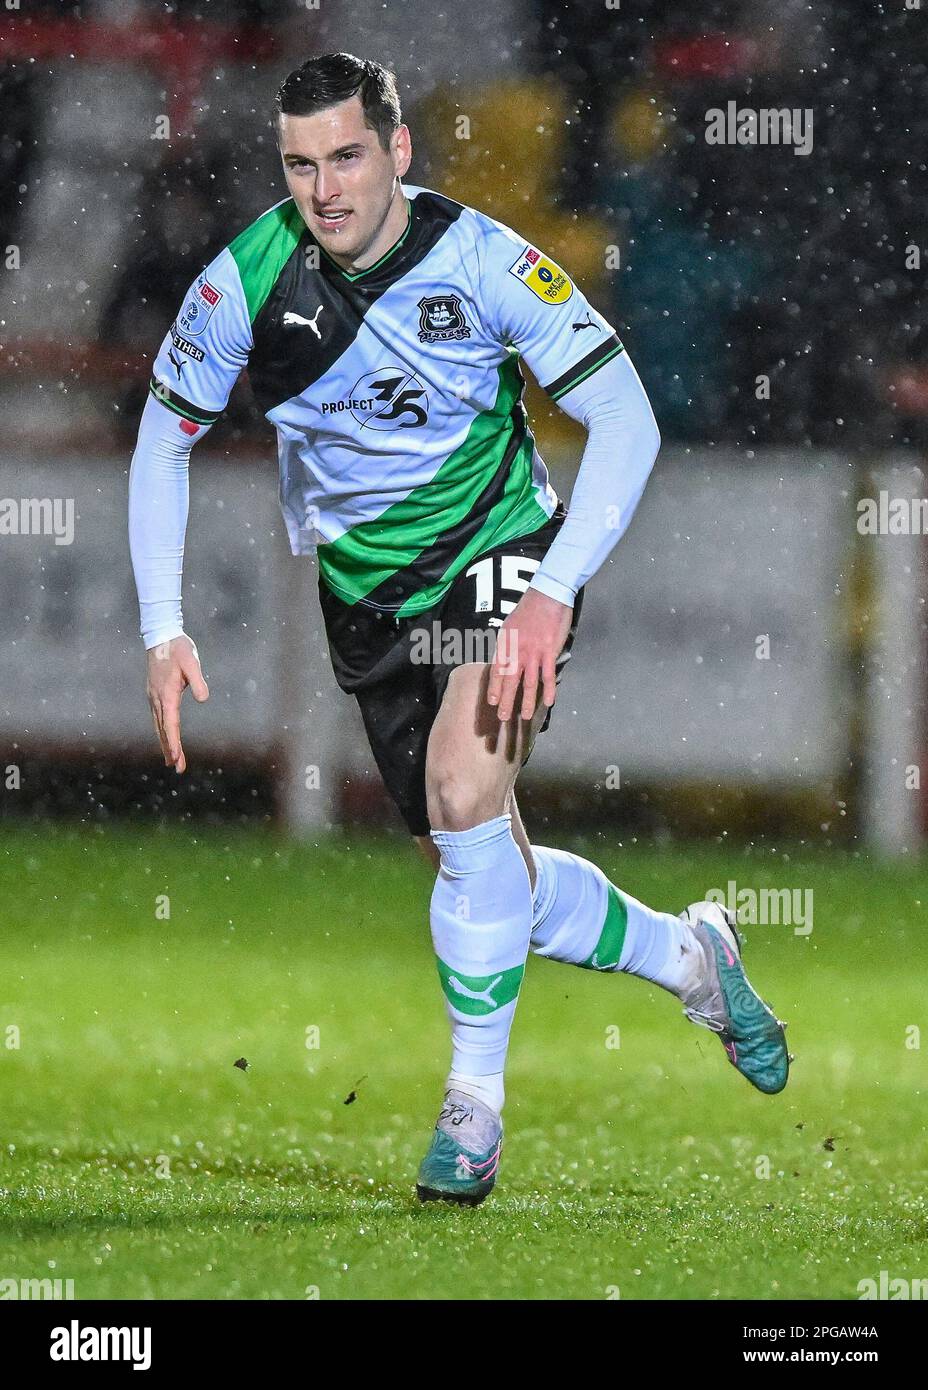 Conor Grant #15 of Plymouth Argyle in action during the Sky Bet League 1 match Accrington Stanley vs Plymouth Argyle at Wham Stadium, Accrington, United Kingdom, 21st March 2023  (Photo by Stan Kasala/News Images) Stock Photo